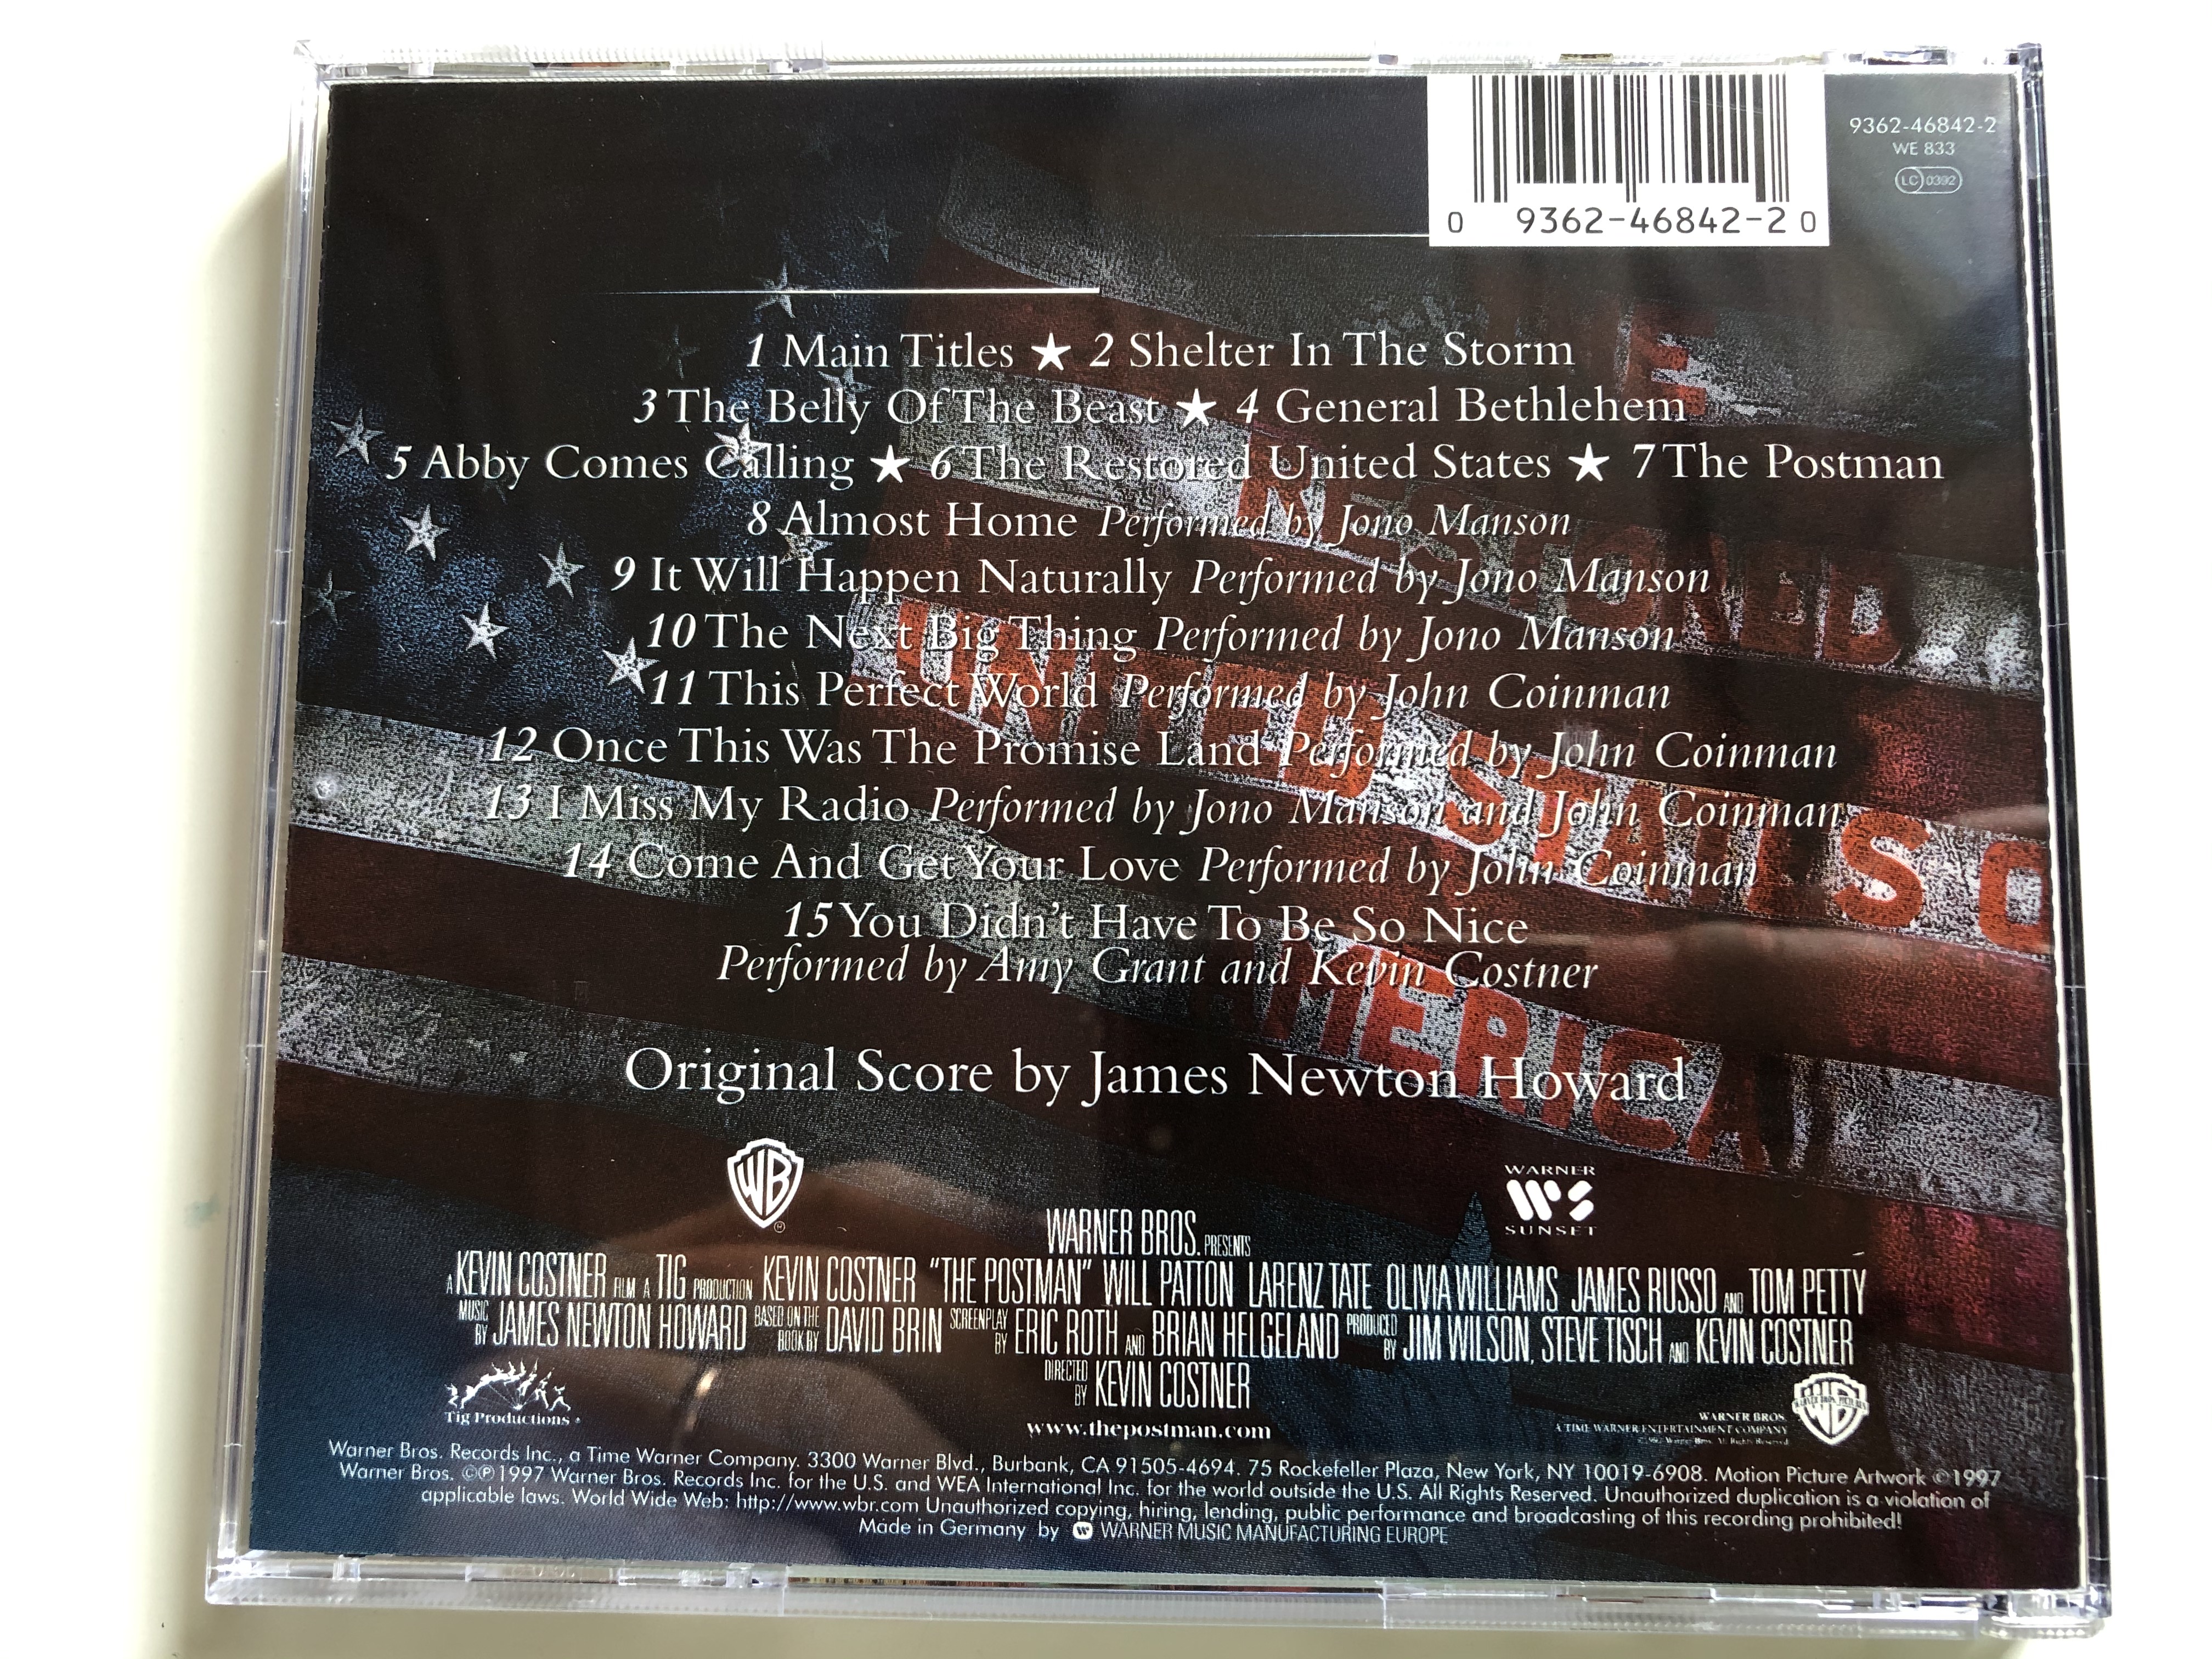 music-from-the-motion-picture-the-postman-original-score-by-james-newton-howard-warner-bros.-records-audio-cd-1997-9362-46842-2-6-.jpg